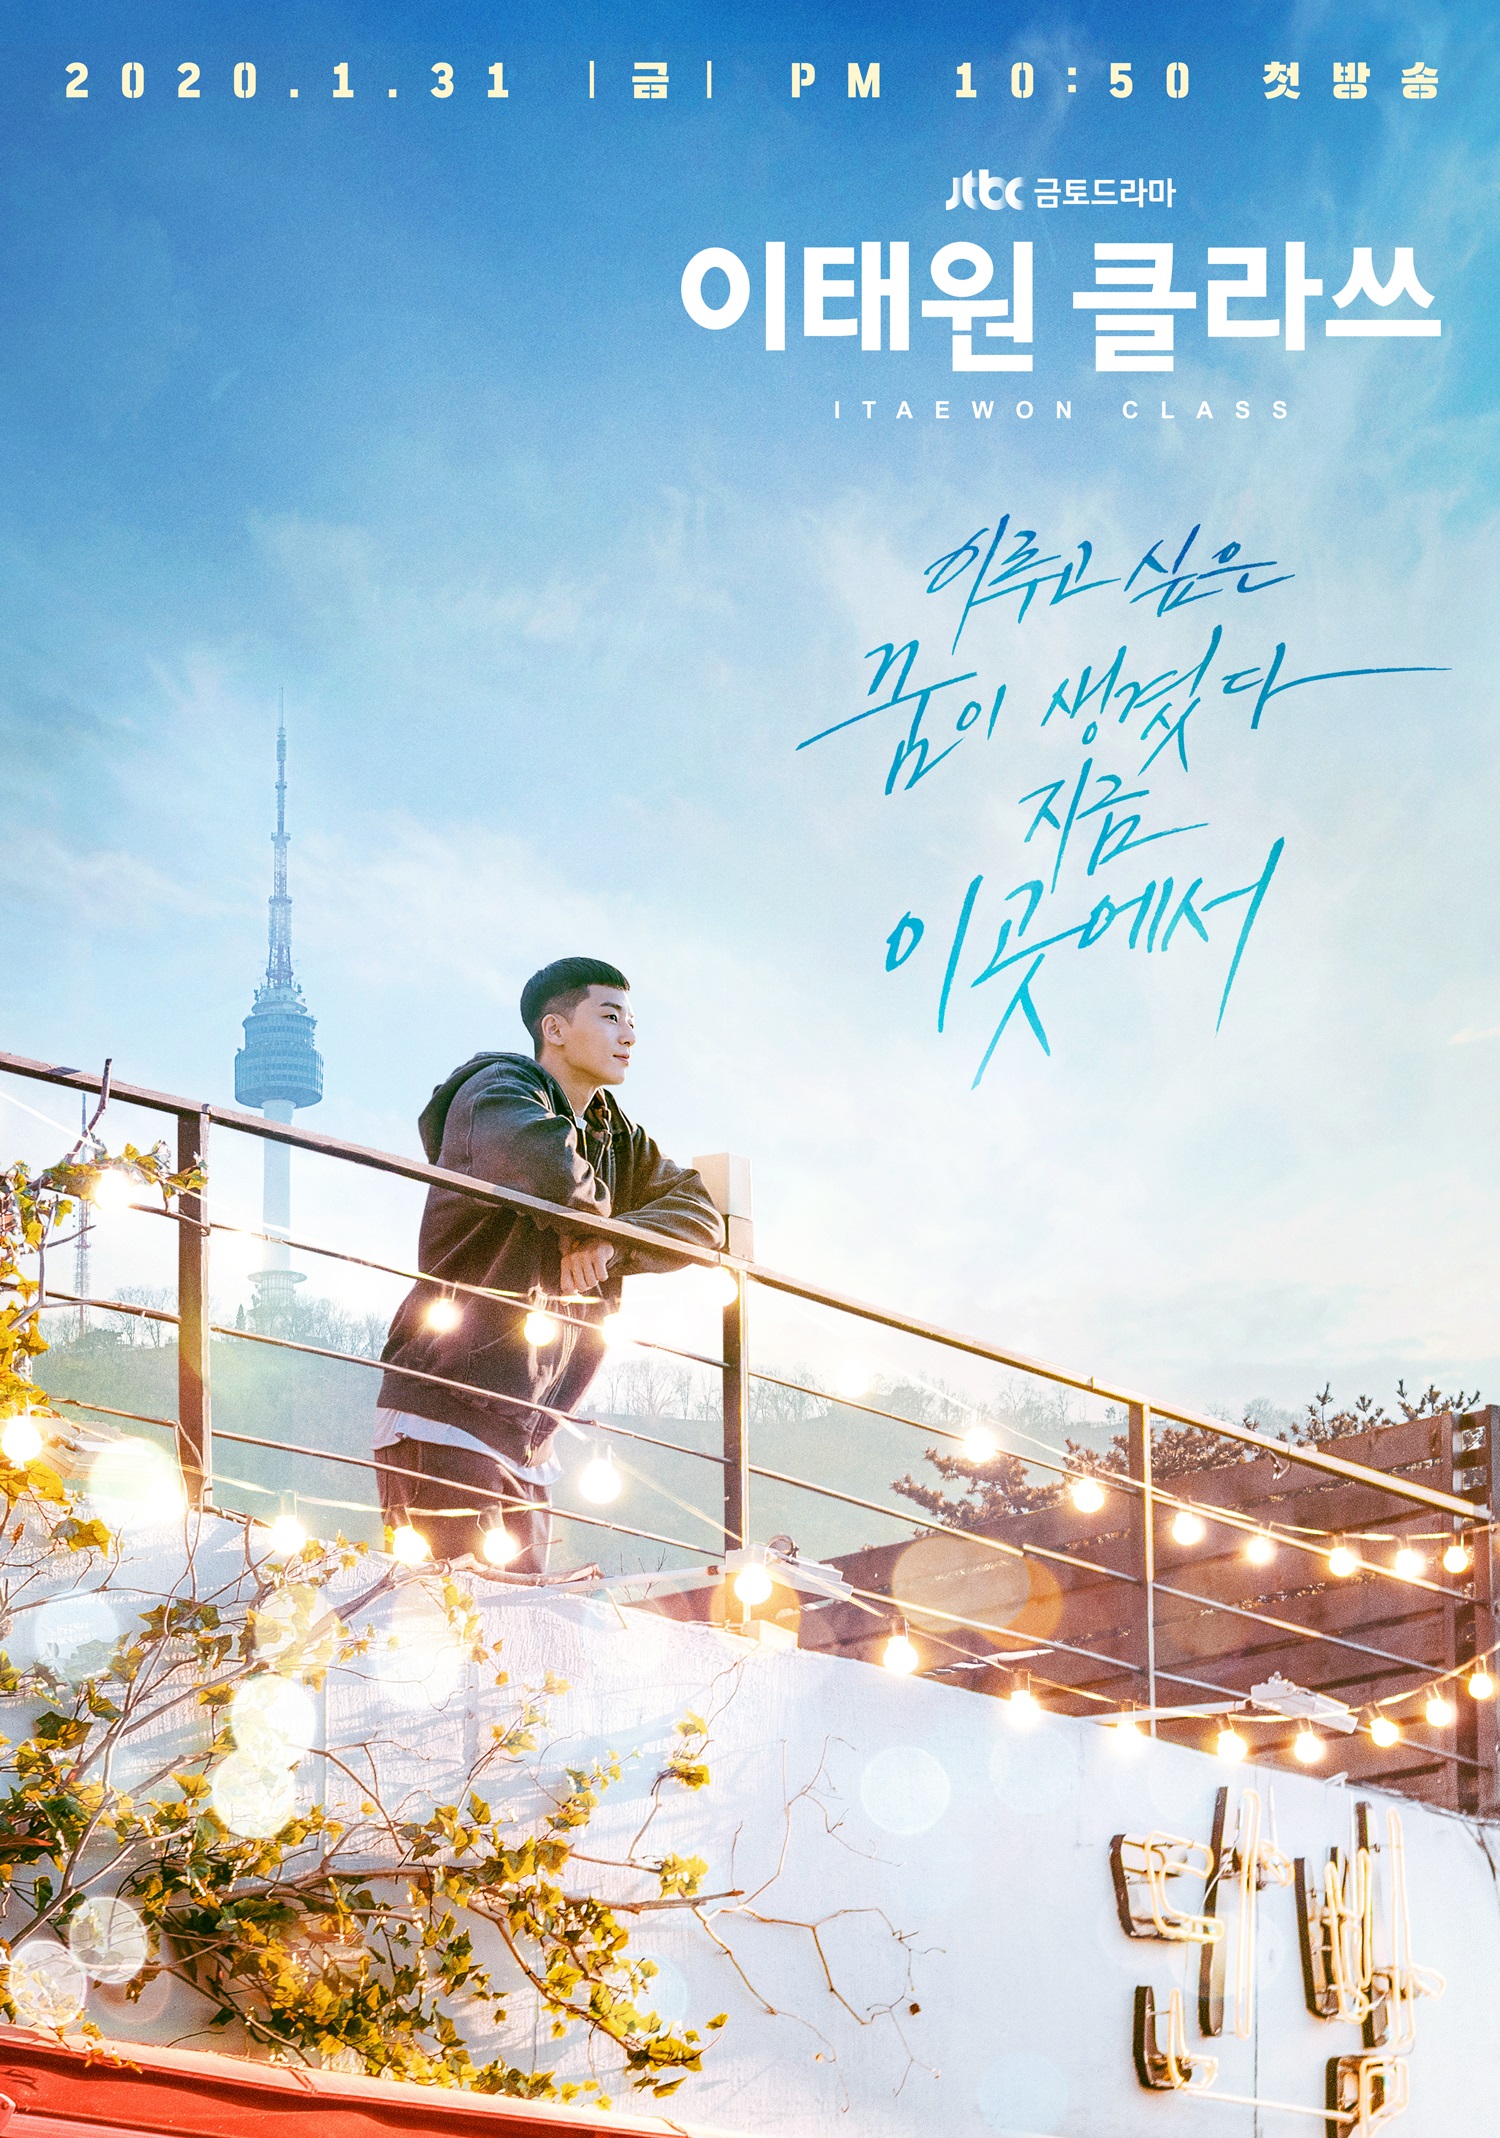 Park Seo-joononon, One Clath, begins the hot rebellion of youth.JTBCs new gilt drama One Clath (directed by Kim Seong-yoon, playwright Jo Kwang-jin, produced by Showbox and written by One, and the next webtoon One Clath) followed by Chocolate, Park Seo-joonon, who turned into a brilliantly bright and hot youth, Roy, on the 13th. Opening Ons Teaser Poster makes the wait thrilling.One Clath, which is the next webtoon of the same name, is a work that depicts the hip rebellion of youths who are united in an unreasonable world, stubbornness and passengerhood.Their entrepreneurial myths, which pursue freedom with their own values ​​are dynamically unfolded on the small streets of Itae, which seem to have compressed the world.Director Kim Seong-yoon, who has been recognized for his sensual production through Gurmi Green Moonlight and Discovery of Love, is holding a megaphone and is expected to be written by one writer Jo Kwang-jin, who has provided exciting fun and deep sympathy with the webtoon One Clath.Actors hard-carrying work, which will bring new charm to Ones character character armed with powerful personality, is also attracting attention.Park Seo-joononon, who has continued to transform without limit from the face of youth full of joy to rocoking that melts the womans heart, Kim Dae-mi, who is attracting attention with his unique charm and solid acting, Yoo Jae-myeong, an actor who believes and sees without explanation, and Kwon Na-ra, a popular actor who is filling his filmography with his own colors, joined together to join the perfect lineup. I have completed.The One Klath has been a hot topic for viewers since the casting announcement, and finally the Teaser Poster is taking off the veil and raising expectations.Park Seo-joononon, who takes the picture of Itae on the roof of Sweet Night and unfolds under his feet, stimulates curiosity.Danbam is a store run by Park Seo-joononon, a place where his dreams are melted. Here, his exciting youth rebellion unfolds.Here, the phrase I have a dream to do here now adds anticipation and curiosity to his story in deep eyes beyond a warm smile.Park Seo-joononon played the role of Roy, a man who had been accepted by Itae as one of his convictions.He started a new dream Top Model on the streets of Itae, which entered with unscathed anger, and he offers an exciting cider with an outspoken counterattack against the big company Jangga in the food industry.Park Seo-joononon said, Roy is a burden as much as many people who have seen Ones work are considered to be a character of life, but I wanted to try Top Model because he is such a charming person.The meeting of Park Seo-joononons Taste Sniper, which continues to renew the solid One piece that guarantees honey jam and each piece, Life Character, heightens expectations for the first broadcast.You can expect the birth of Park Seo-joononon, Roy, which will amplify the charm of One Character, said the production team of One Clath. I would like to ask for your expectation and interest in the drama One Clath, which was reborn with a richer attraction and a deeper story.One Clath is Showboxs first production drama that has shown films with workability and popularity such as Taxi Driver, Assassination, and Tunnel.It will be broadcast first on JTBC at 10:50 pm on Friday, January 31, following Chocolate.